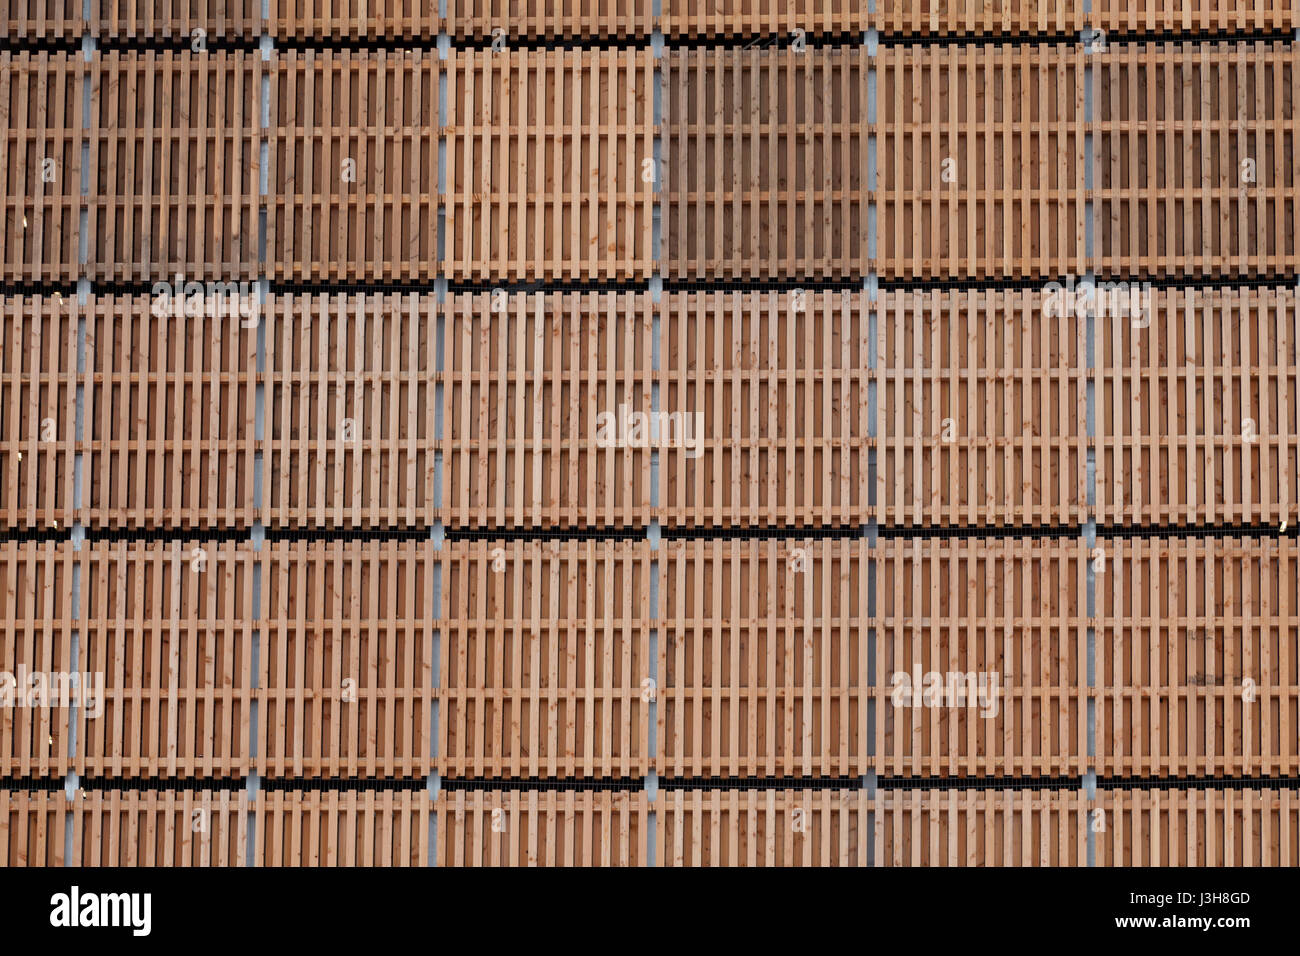 Facade with wooden paneling Stock Photo